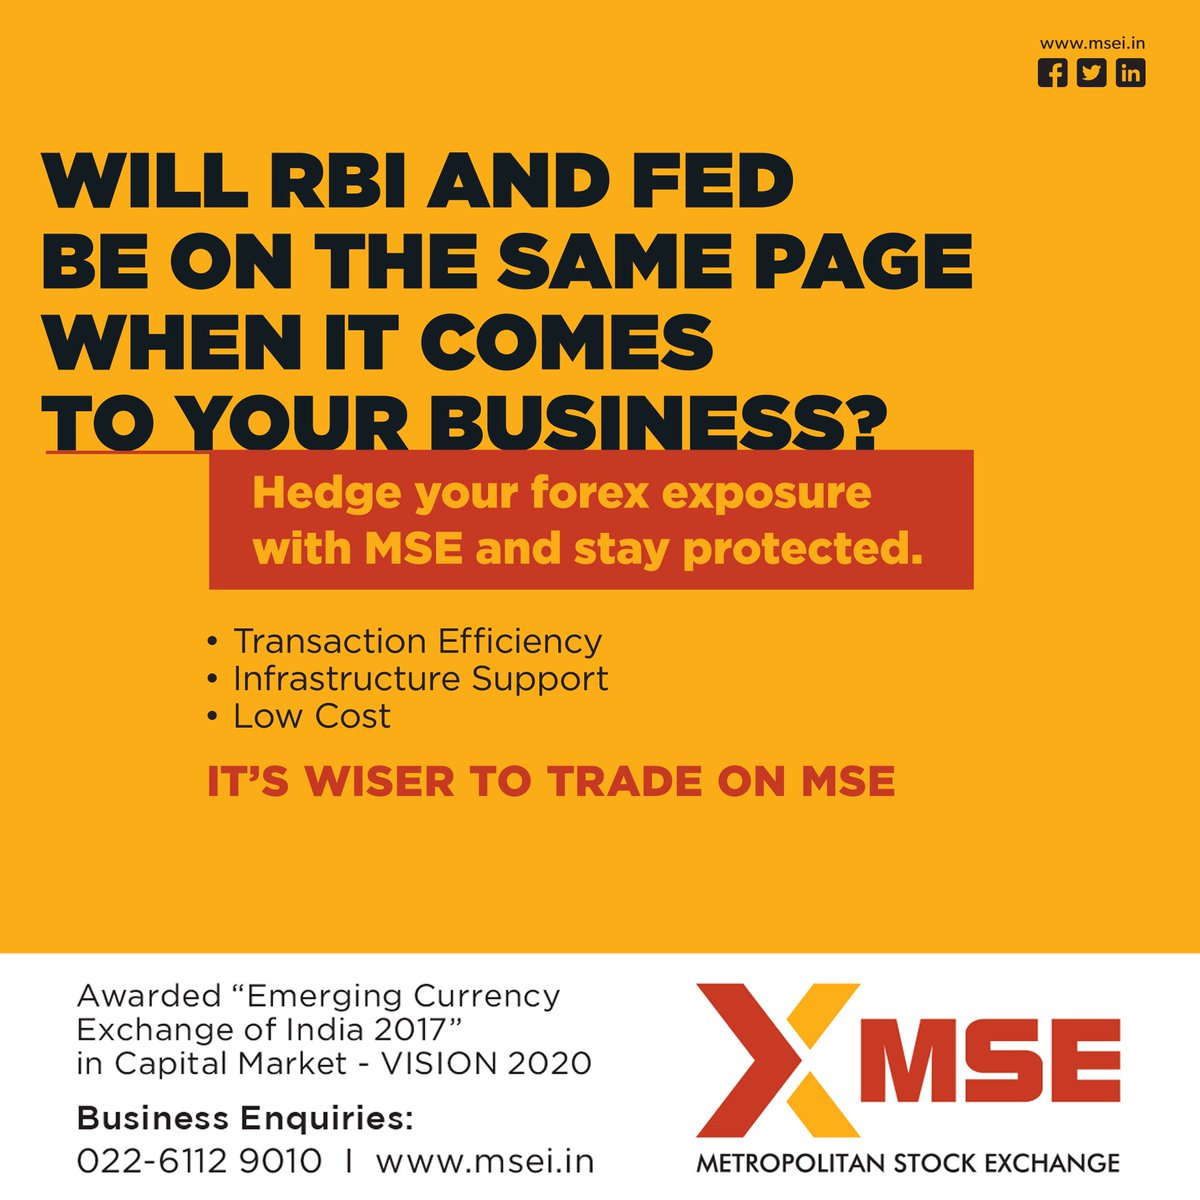 Mse On Twitter Forex Exposure Can Break Your Business Stay - 